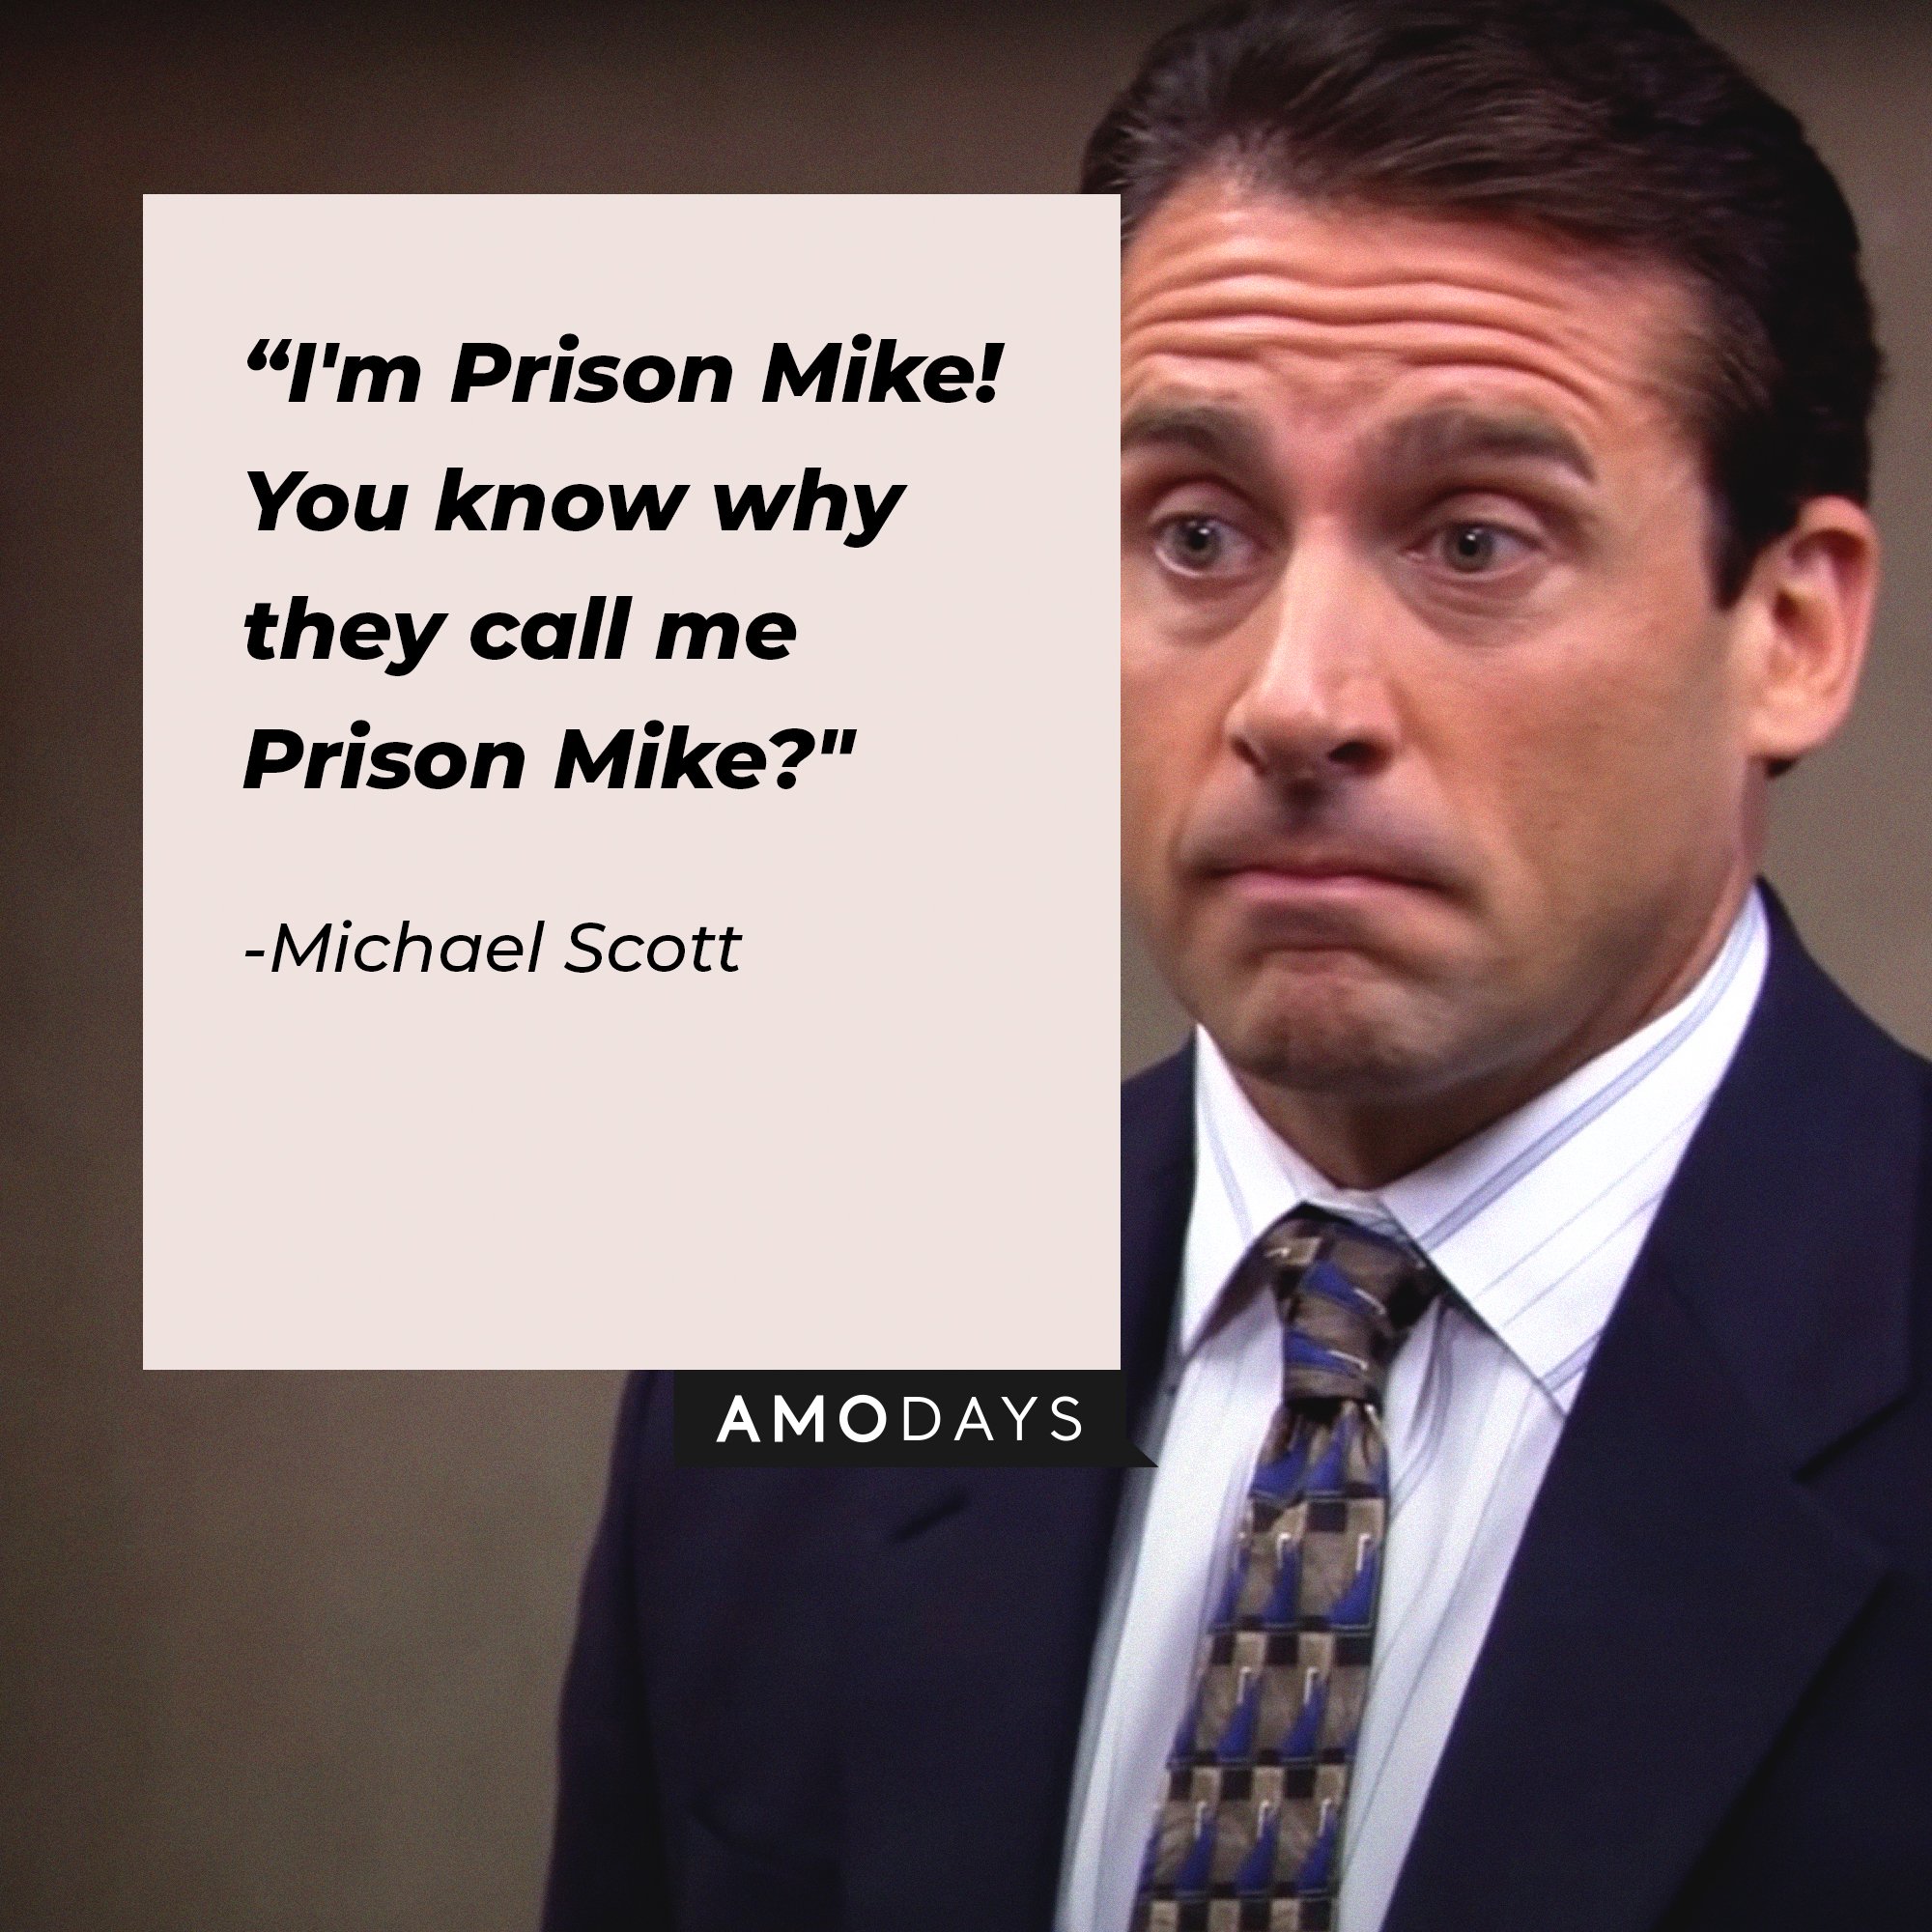 Michael Scott’s quote: "I'm Prison Mike! You know why they call me Prison Mike?" | Image: AmoDays